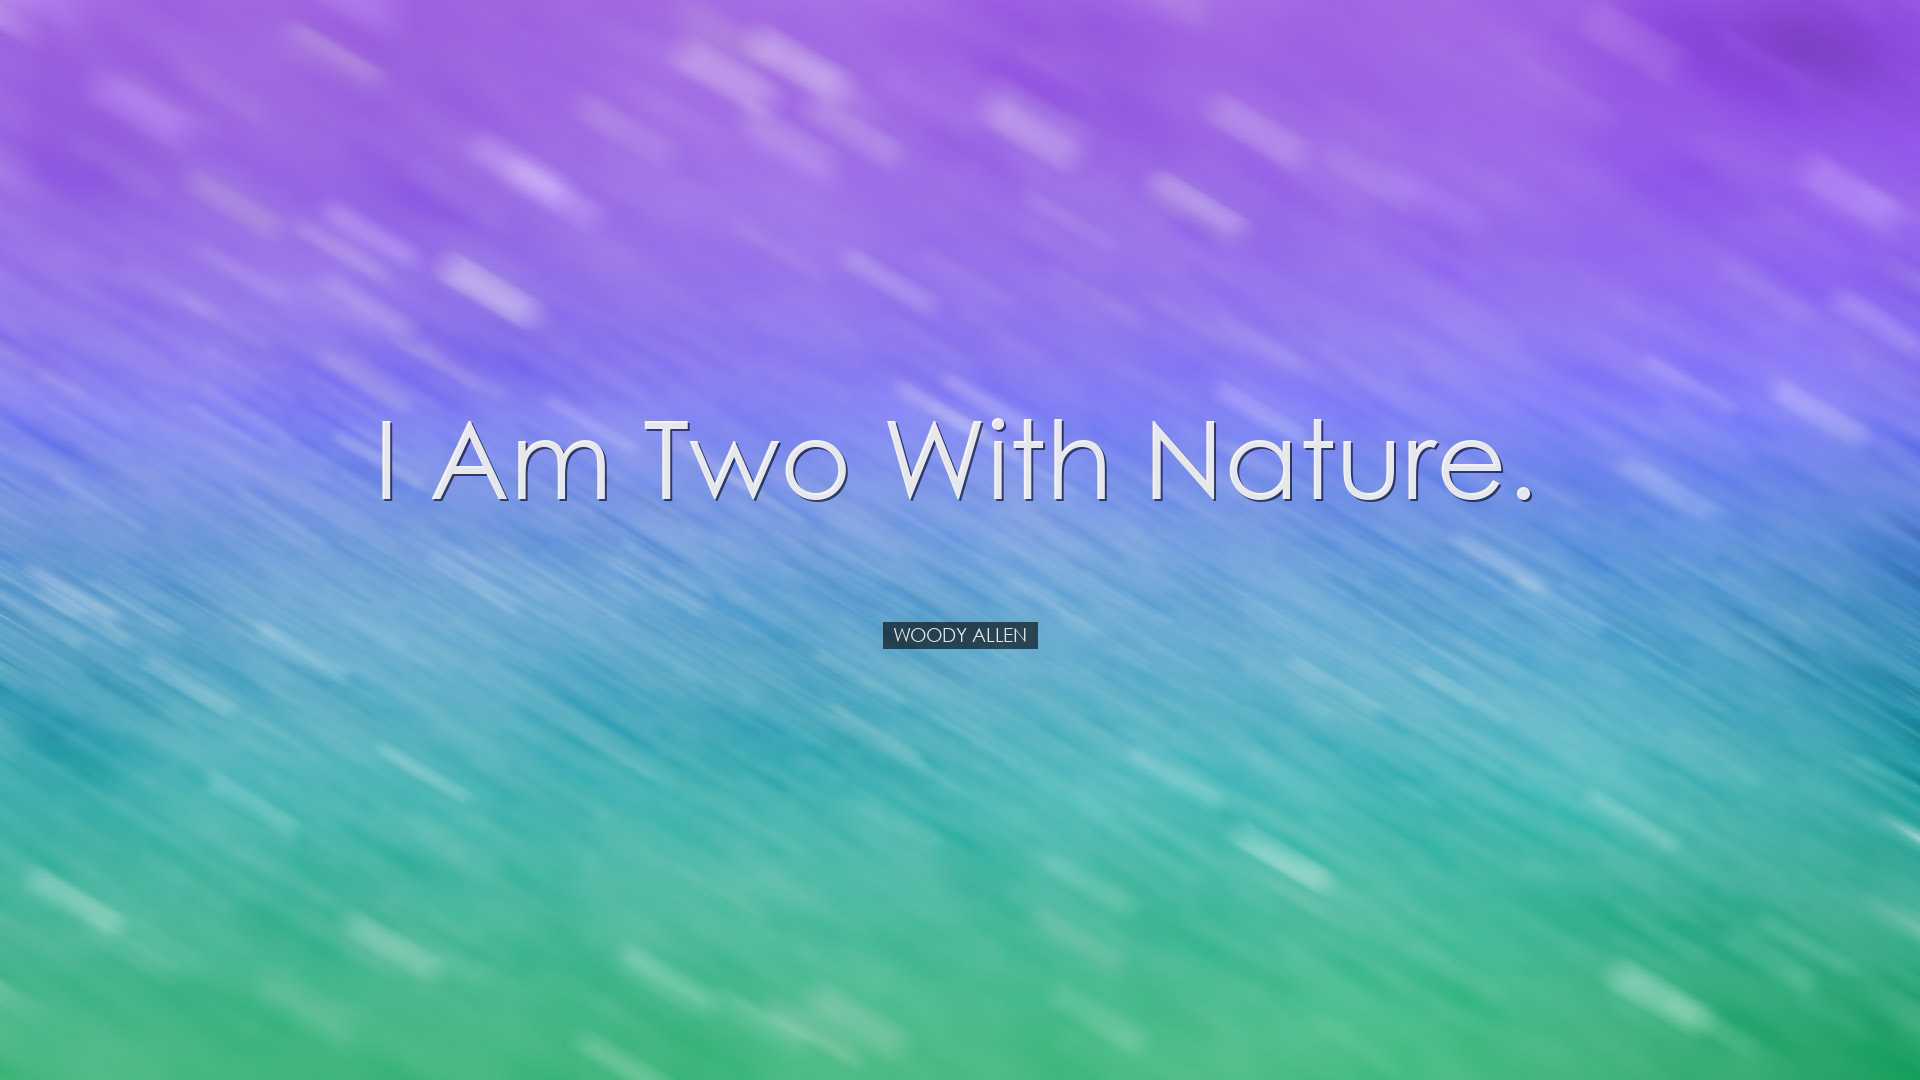 I am two with nature. - Woody Allen